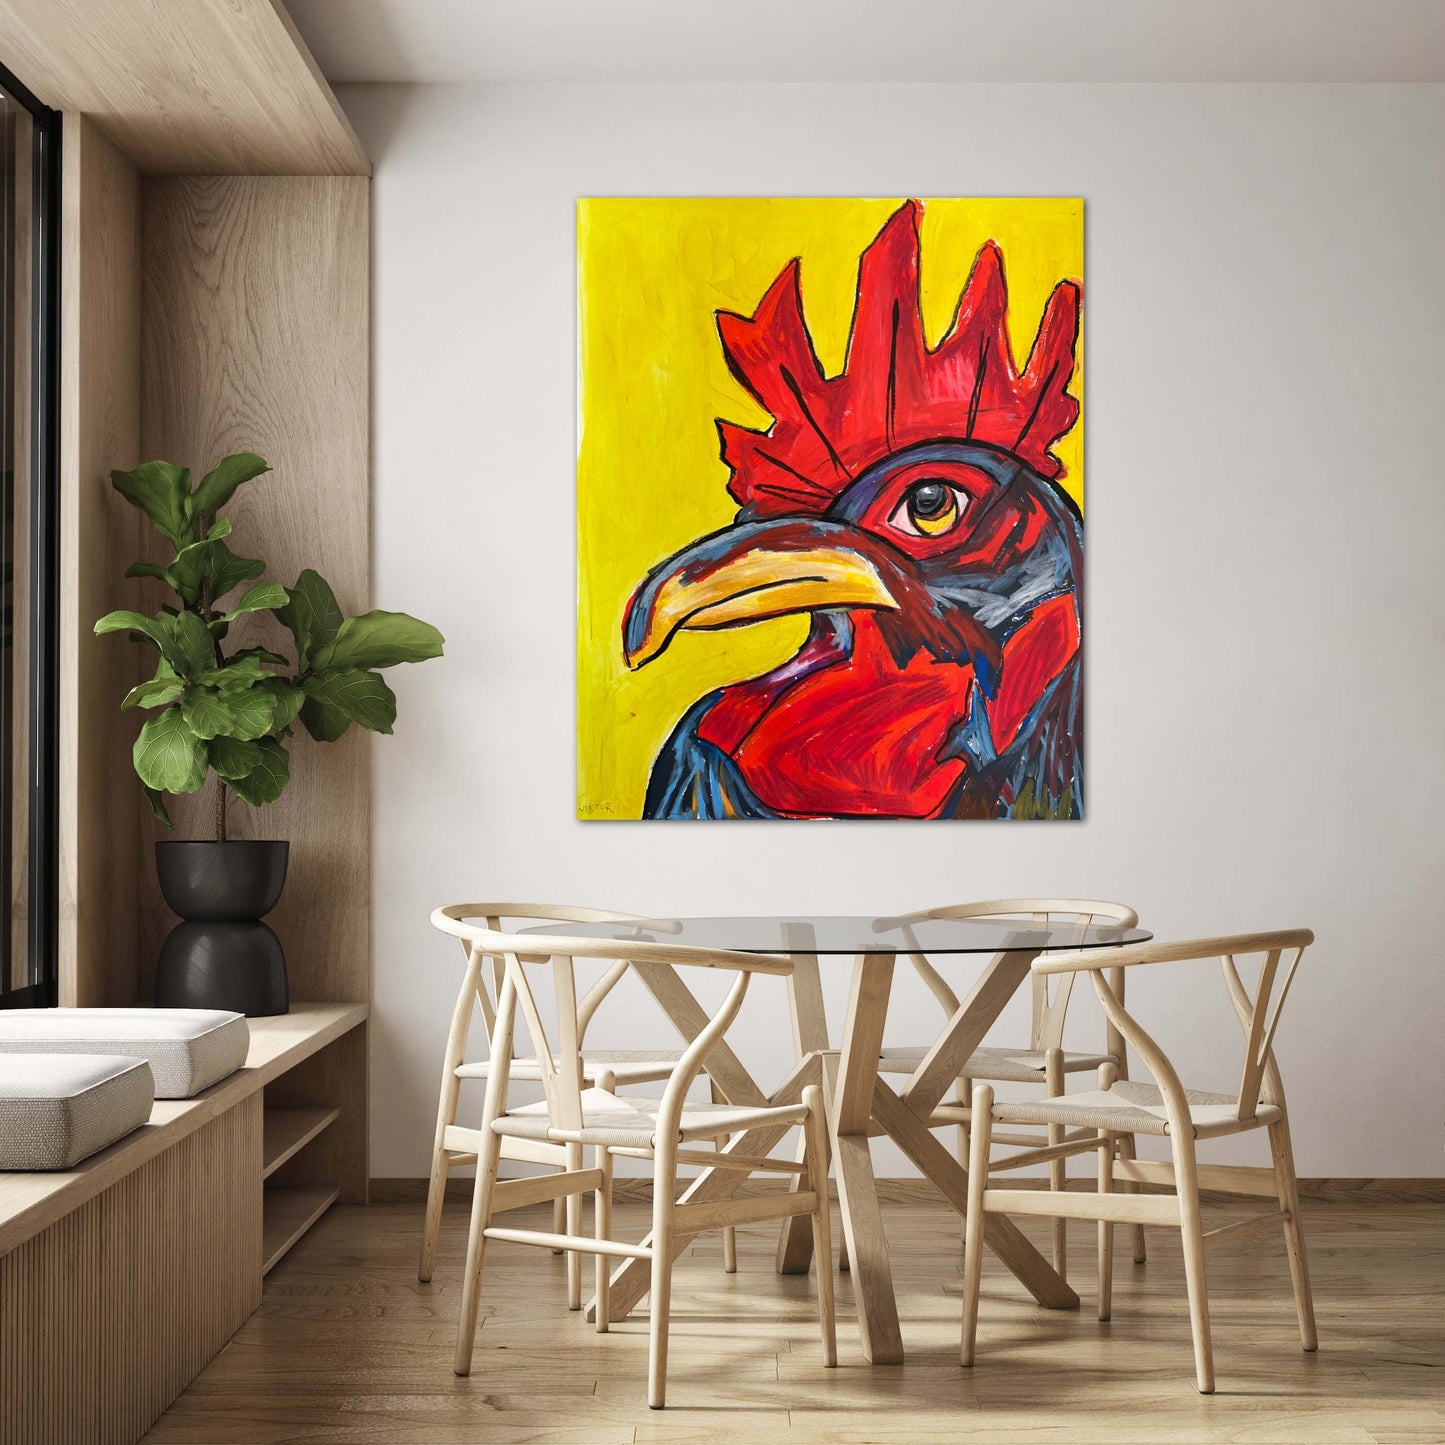 Mr Rooster - Print, Poste and Stretched Canvas Print